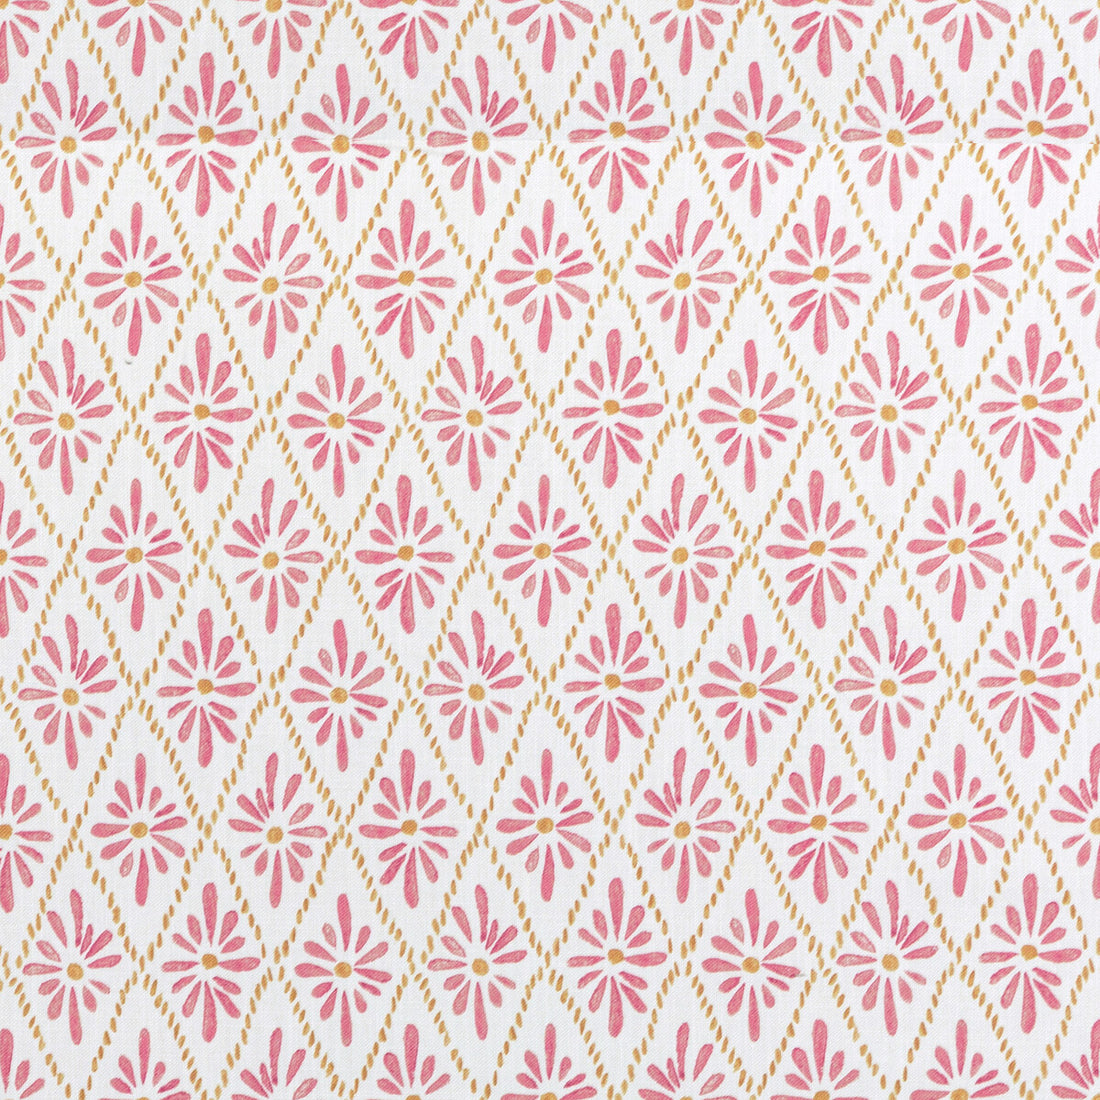 Malina fabric in azalea color - pattern MALINA.17.0 - by Kravet Basics in the Monterey collection